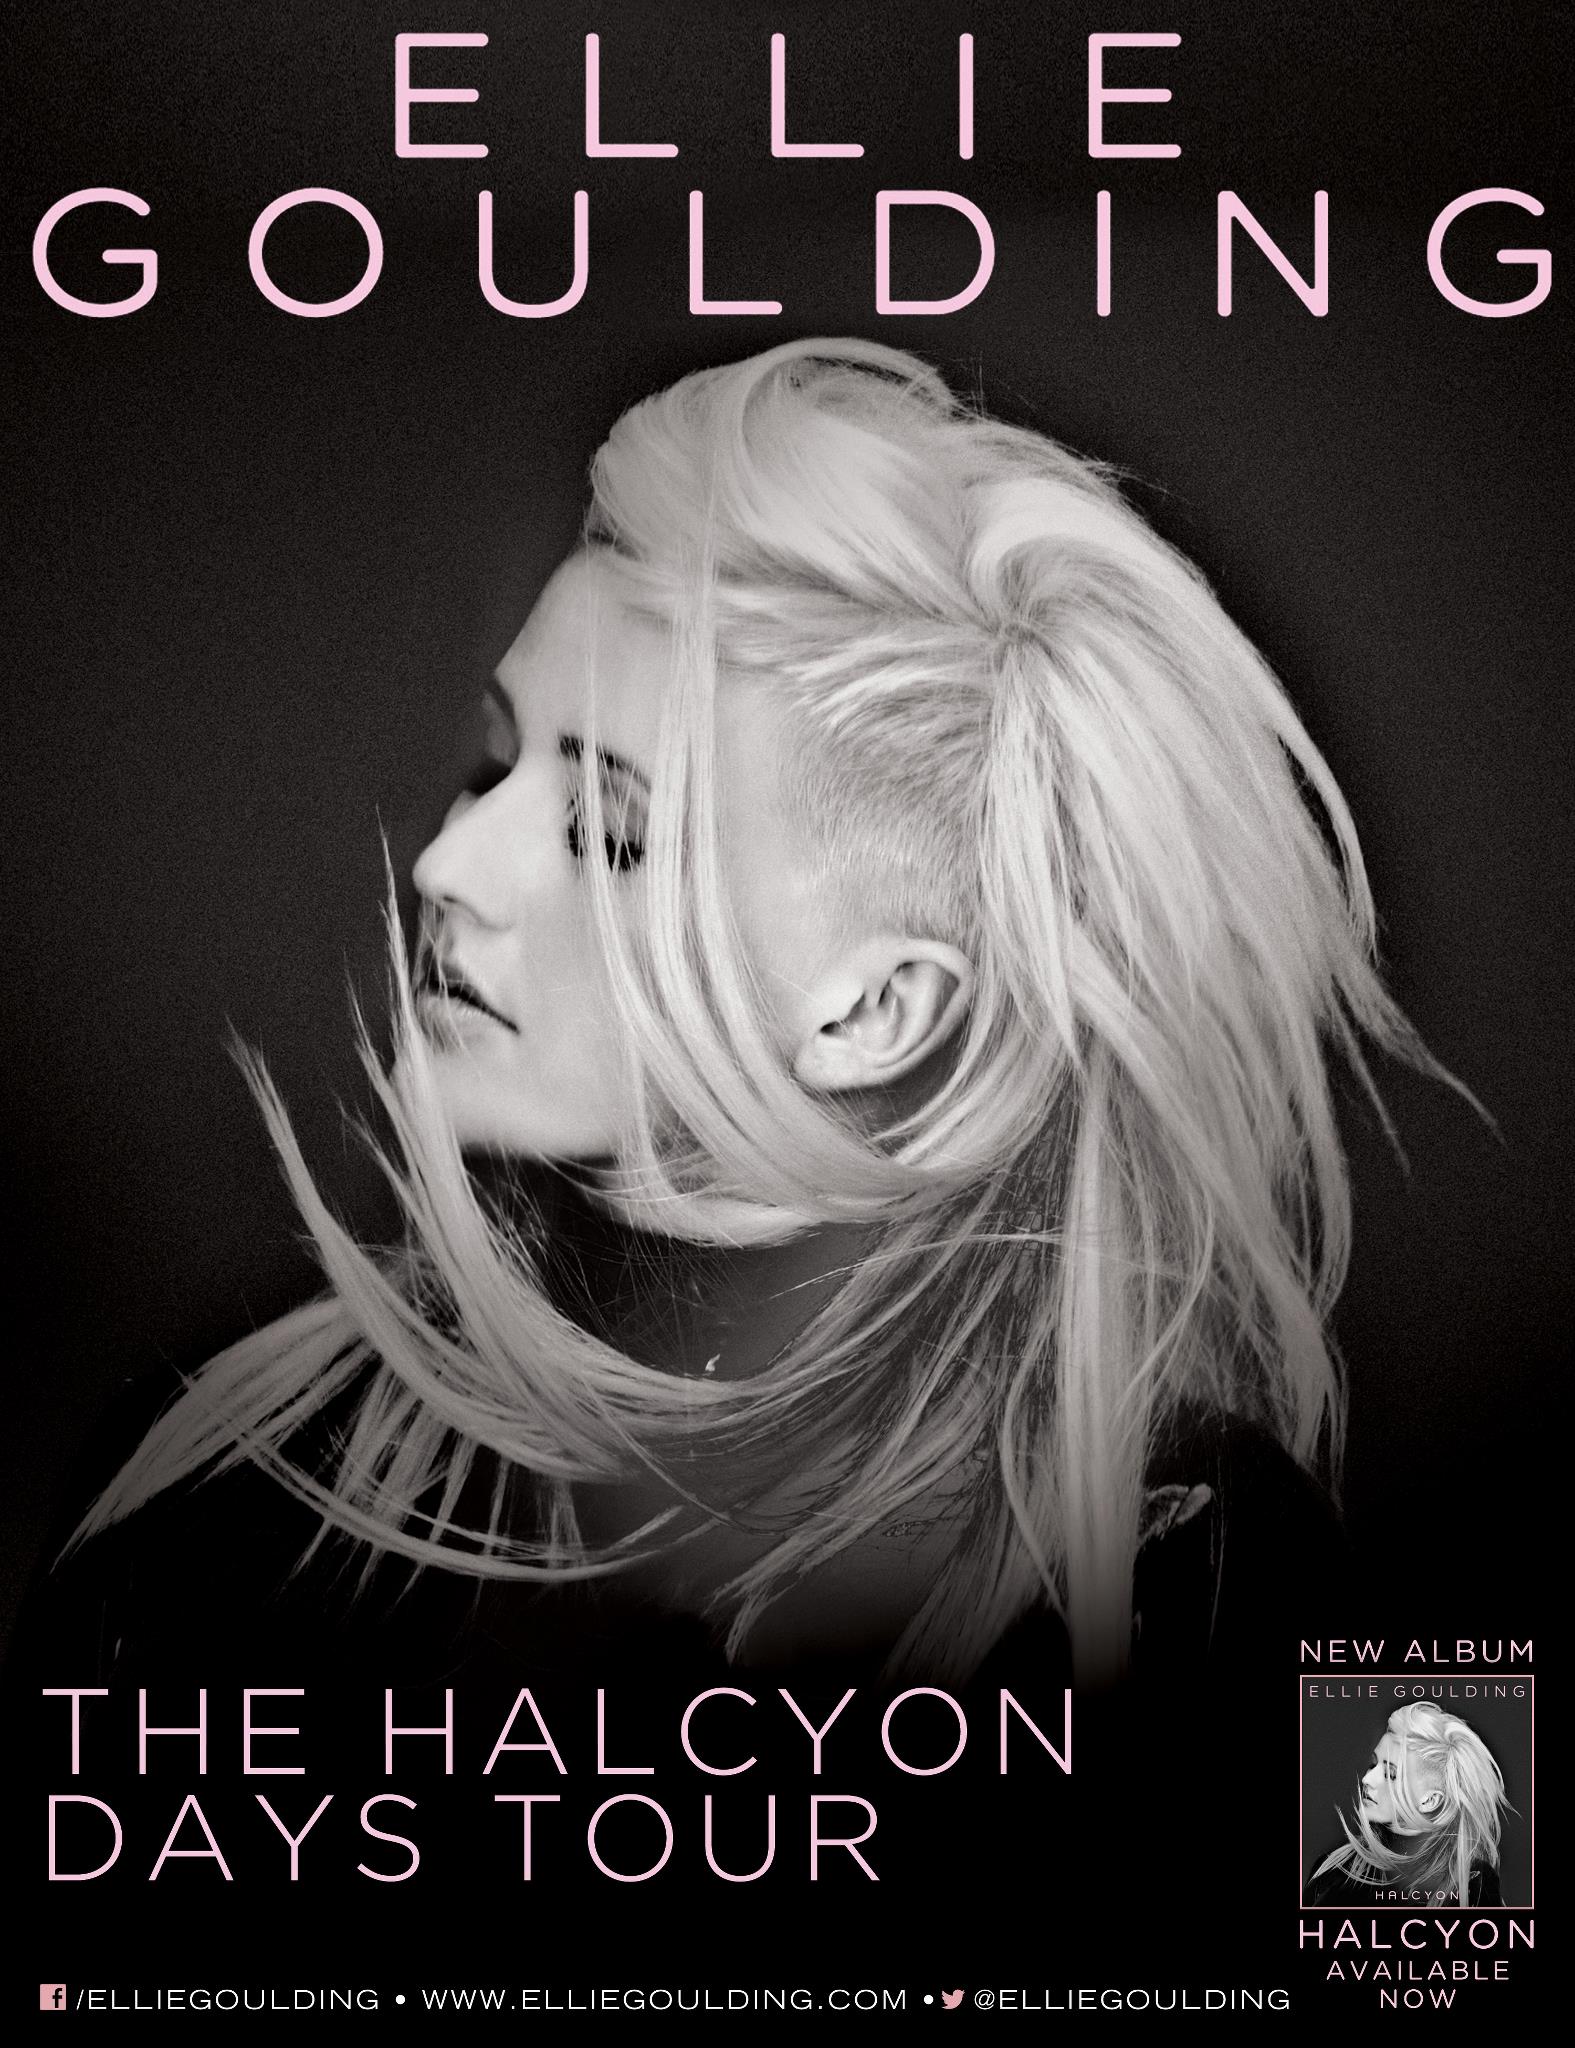 Ellie Goulding to bring the 2013 Halcyon Tour to Seattle!